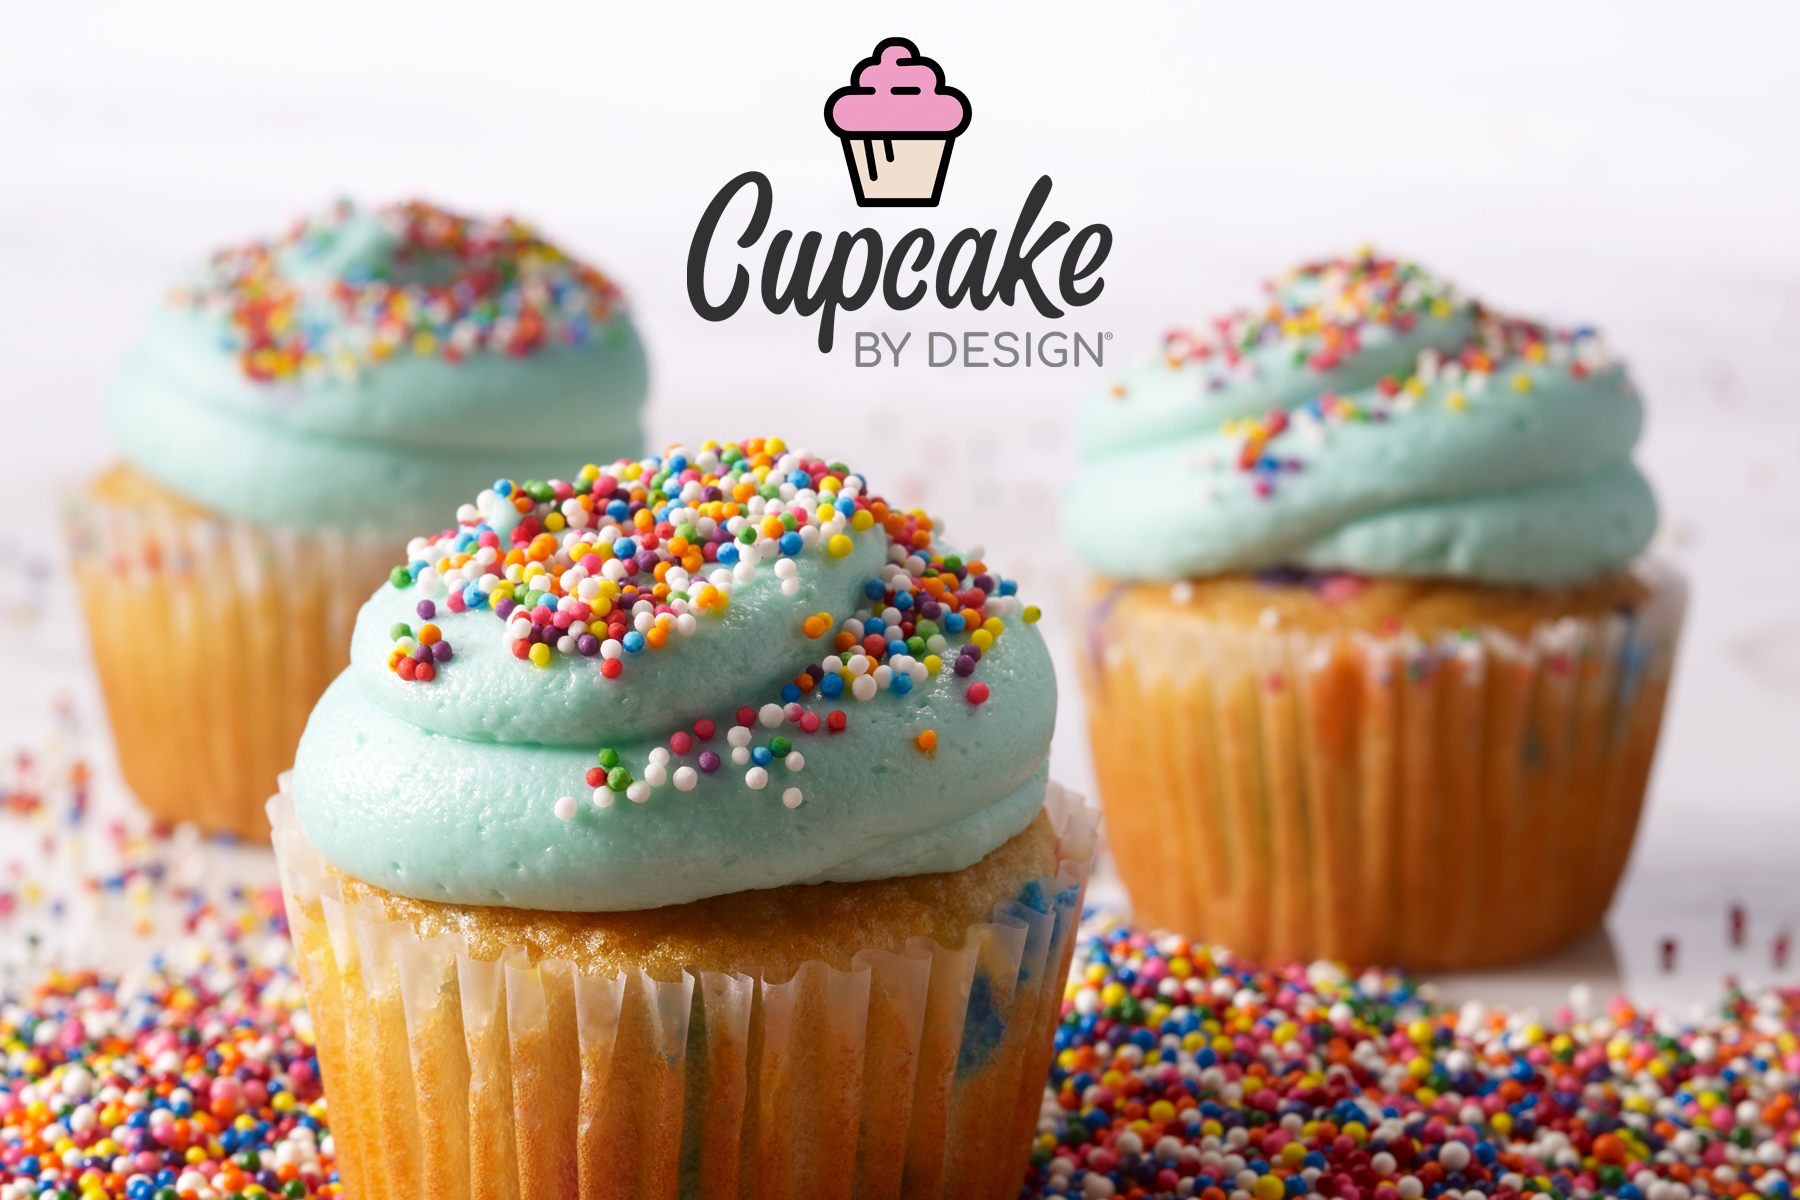 New! Cupcake by Design